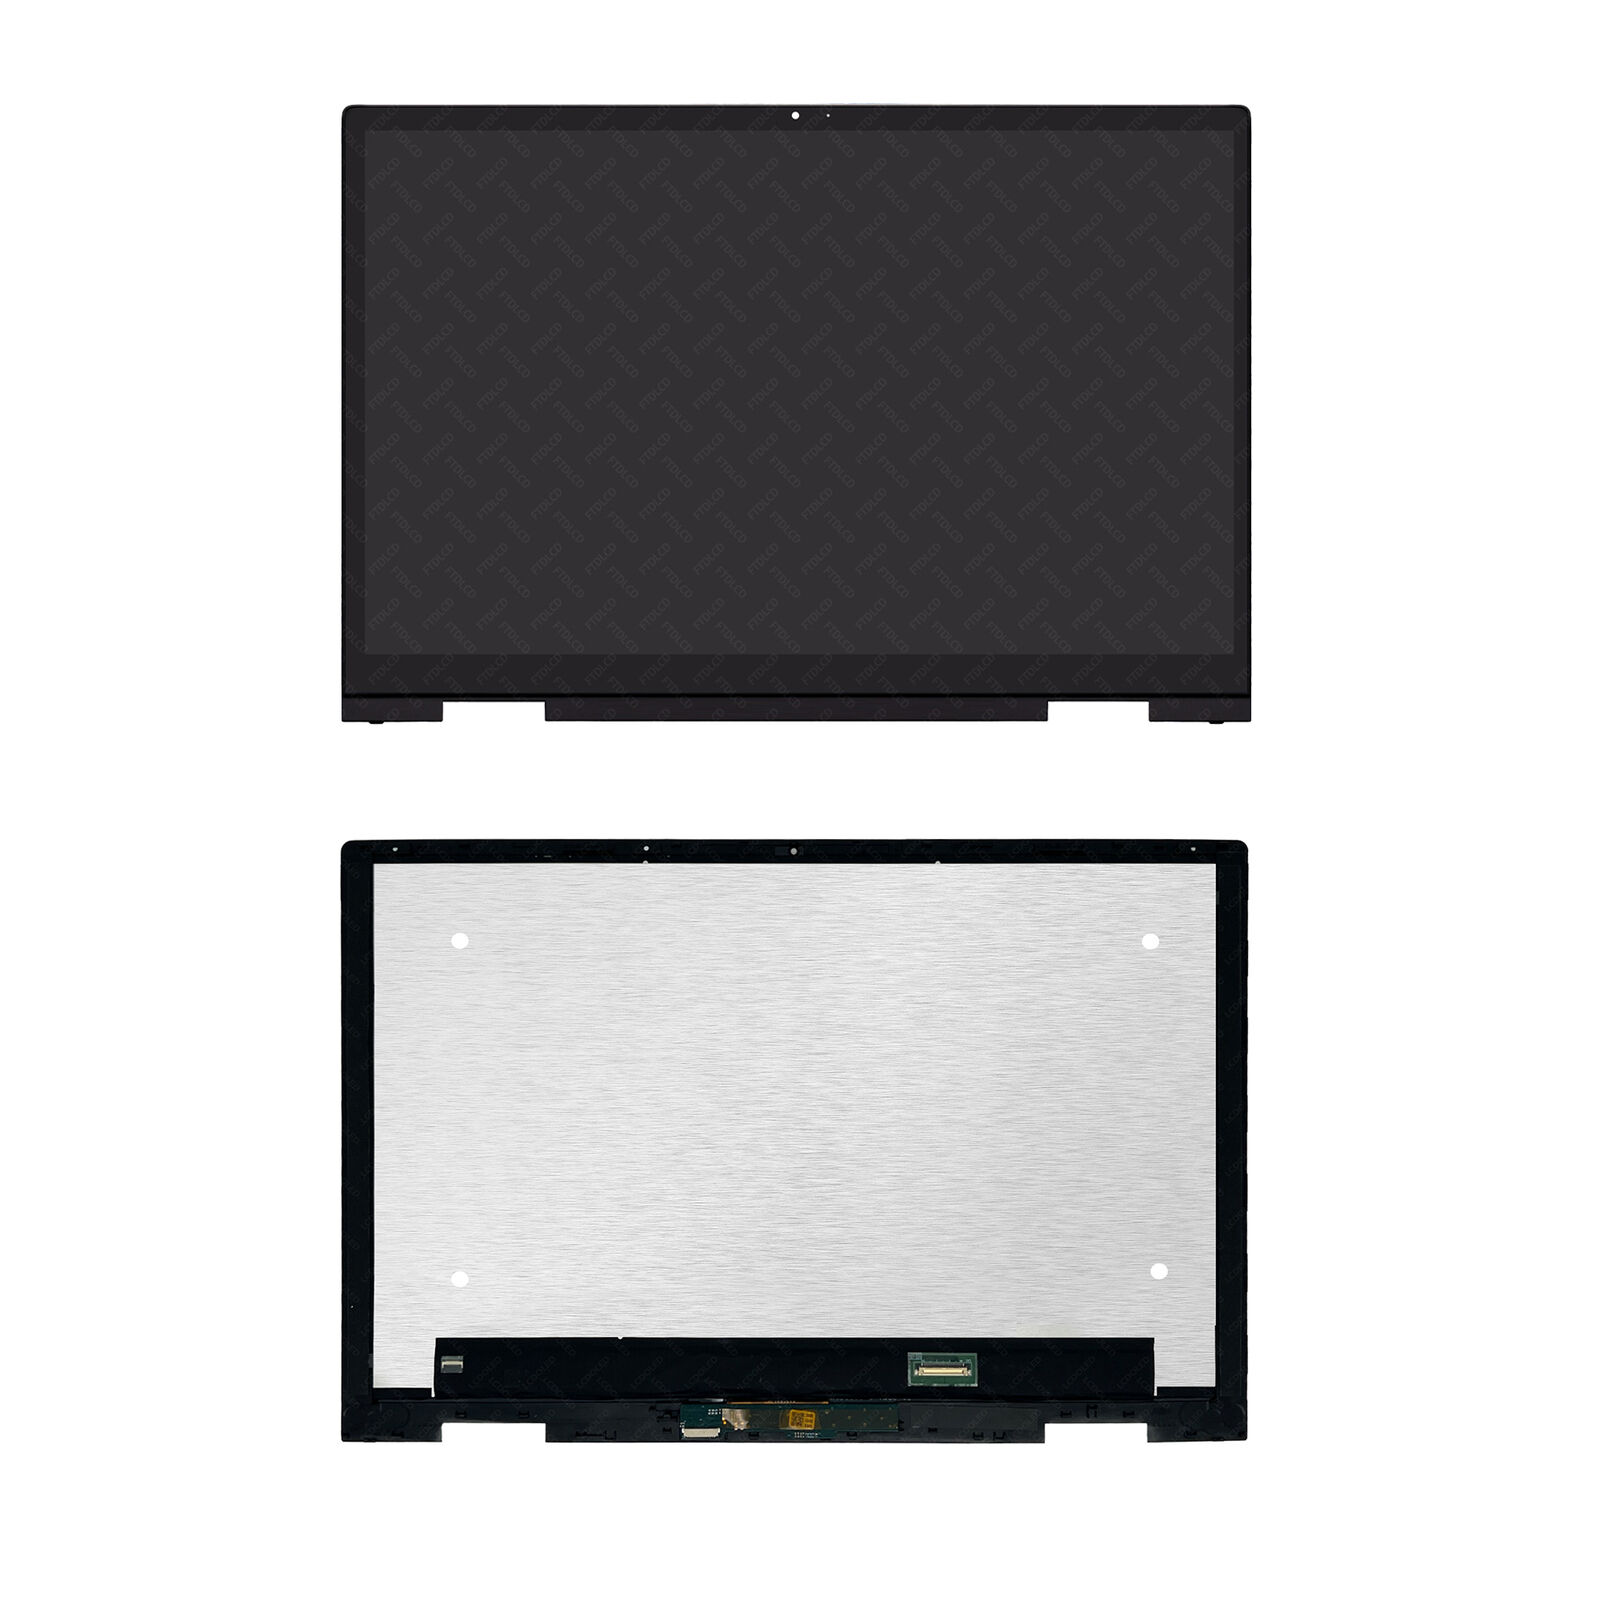 L93182-001 L93180-001 FHD LCD Touch Screen Assembly for HP Envy x360 15m-ed0000